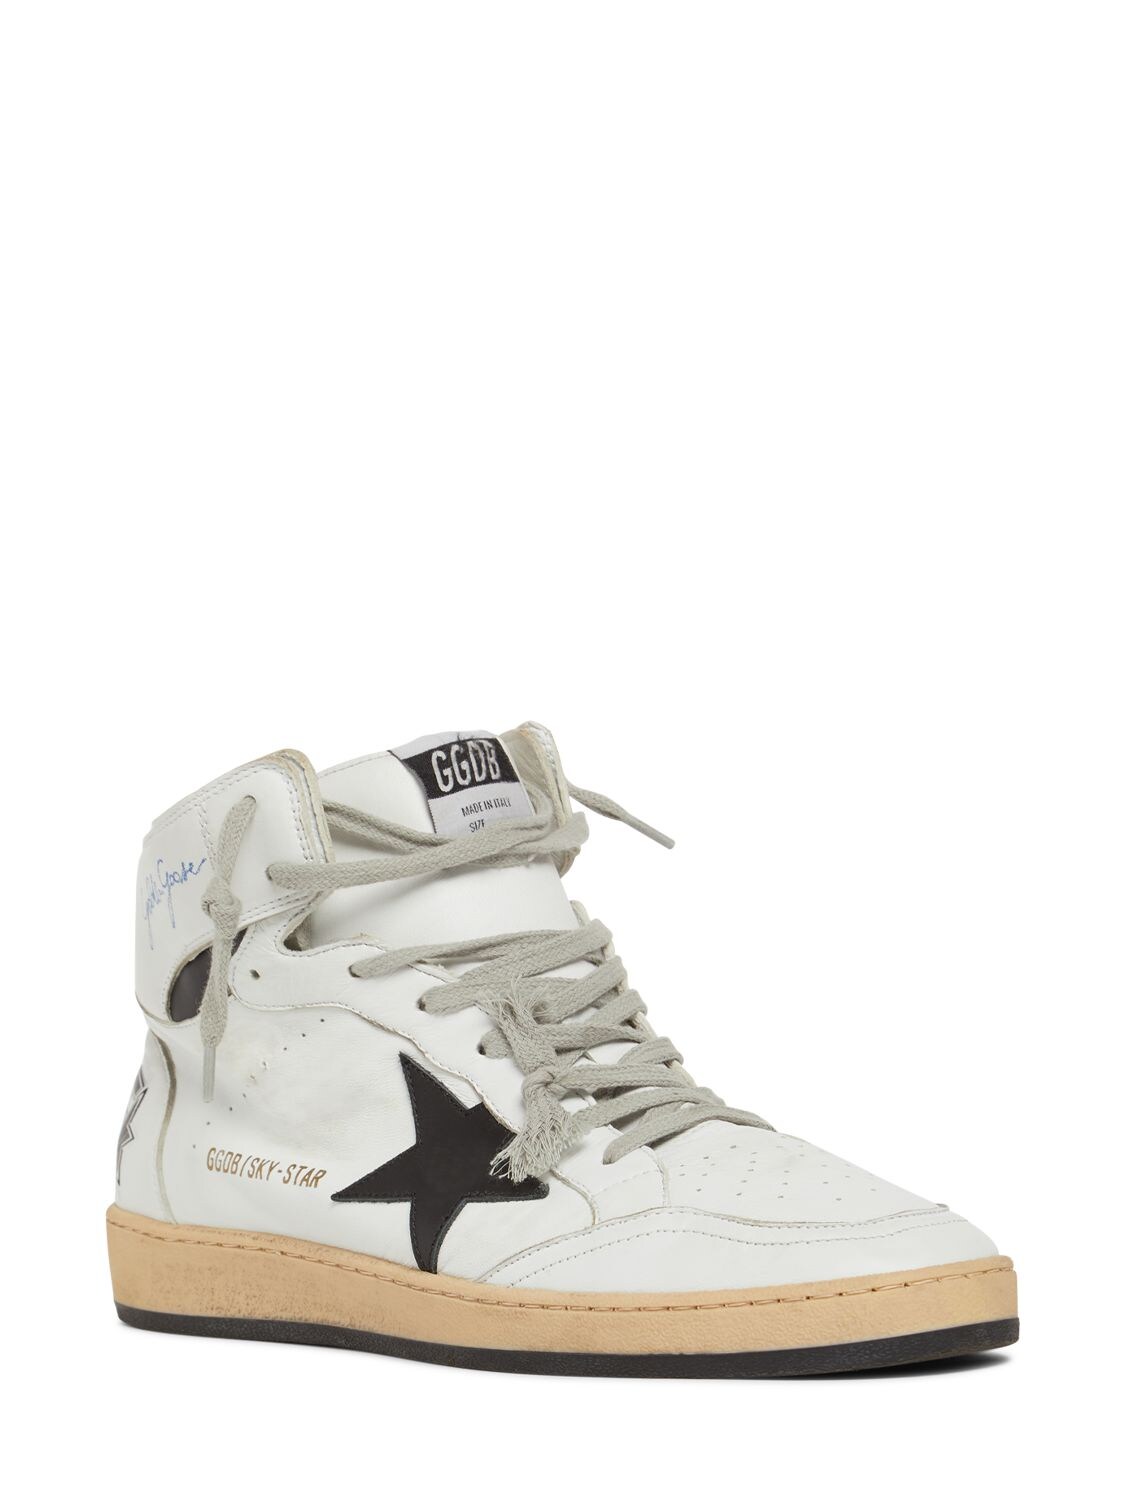 Shop Golden Goose Sky Star Leather Sneakers In White,black